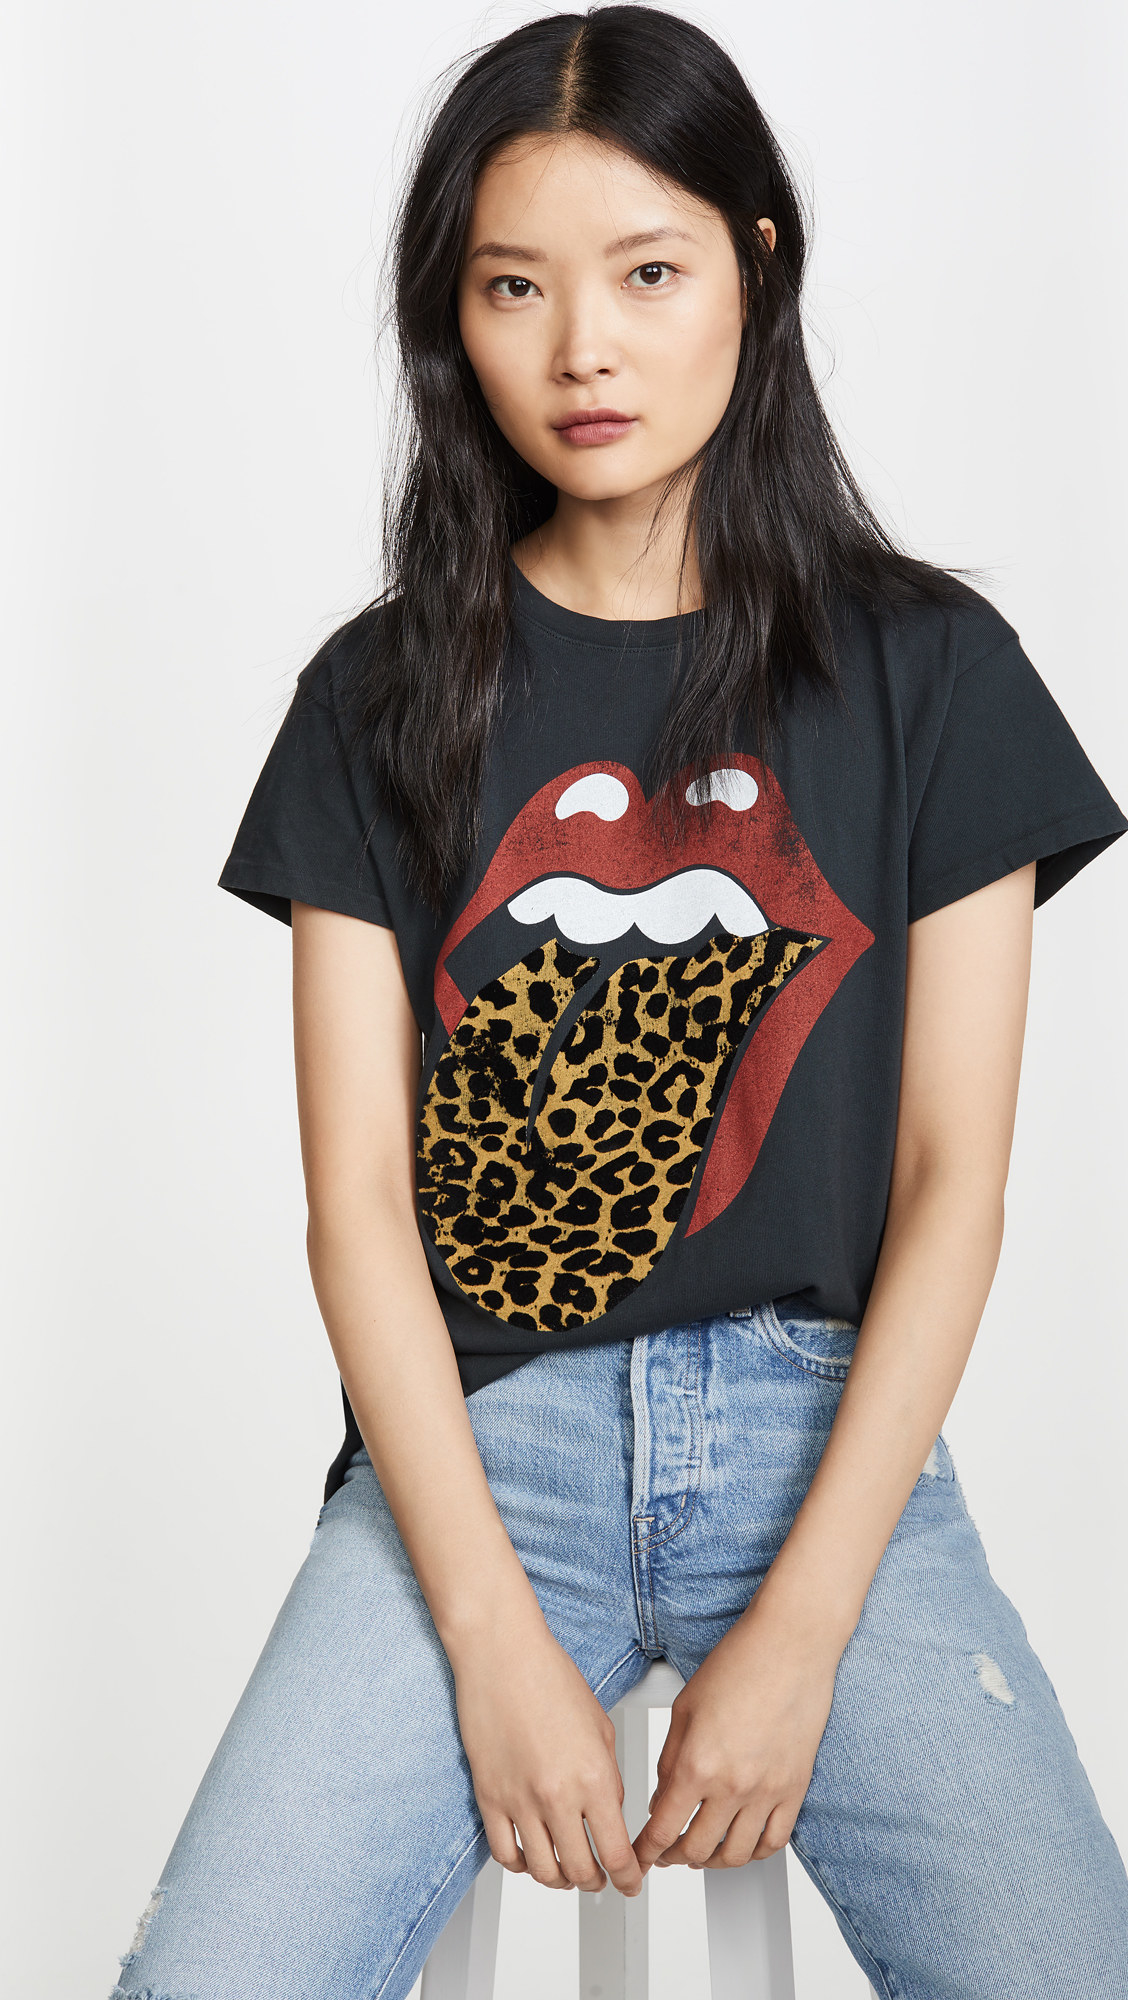 a model wearing a black tee with the rolling stones lips and tongue logo but the tongue is leopard print